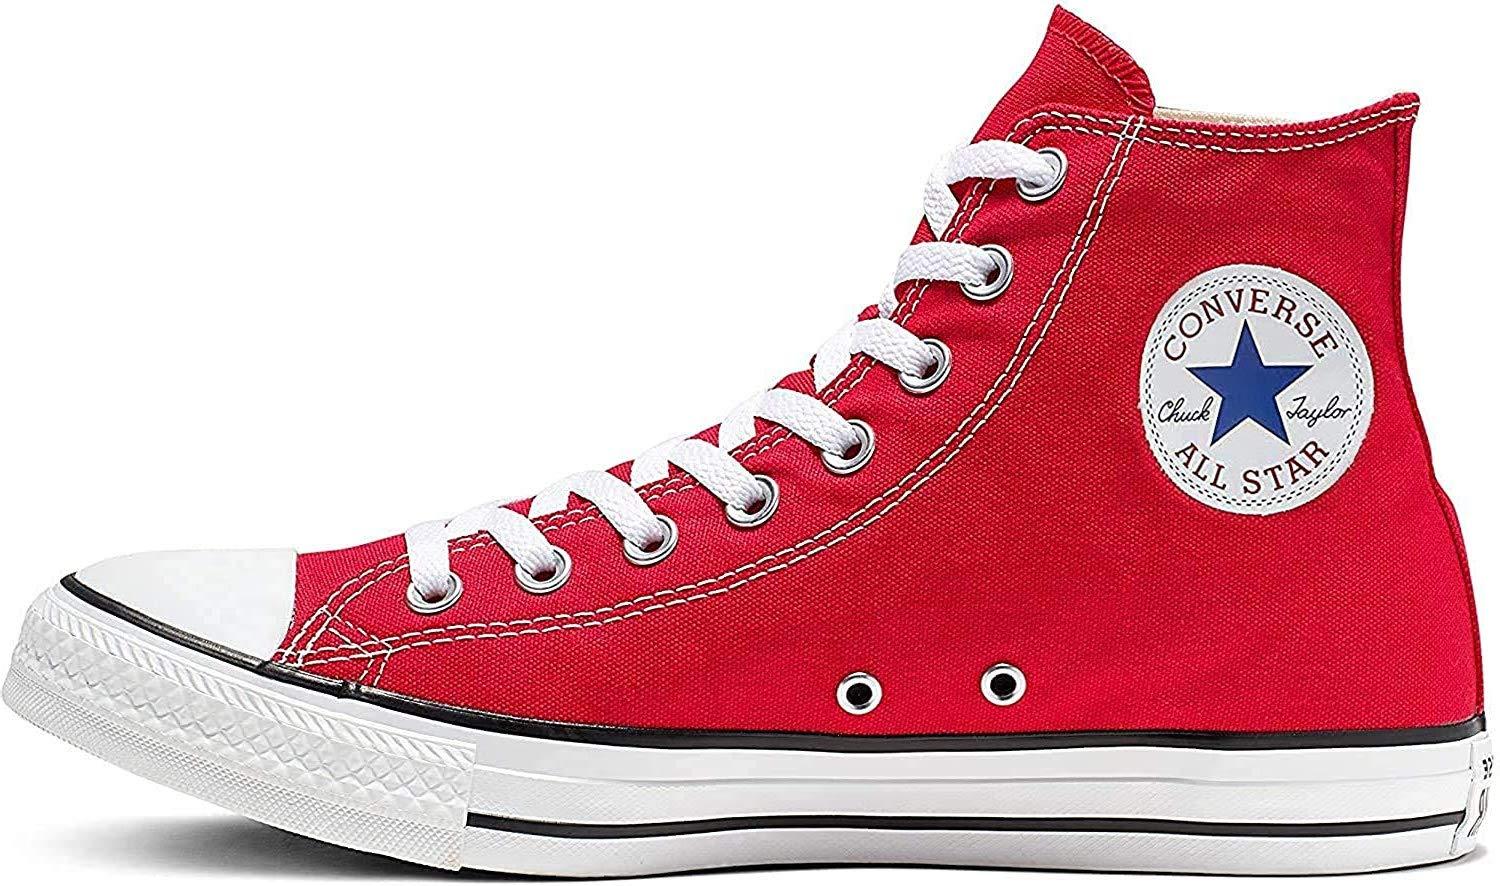 Converse Canvas Adult Chuck Taylor All Star Hi Top Trainers In Red Lyst 